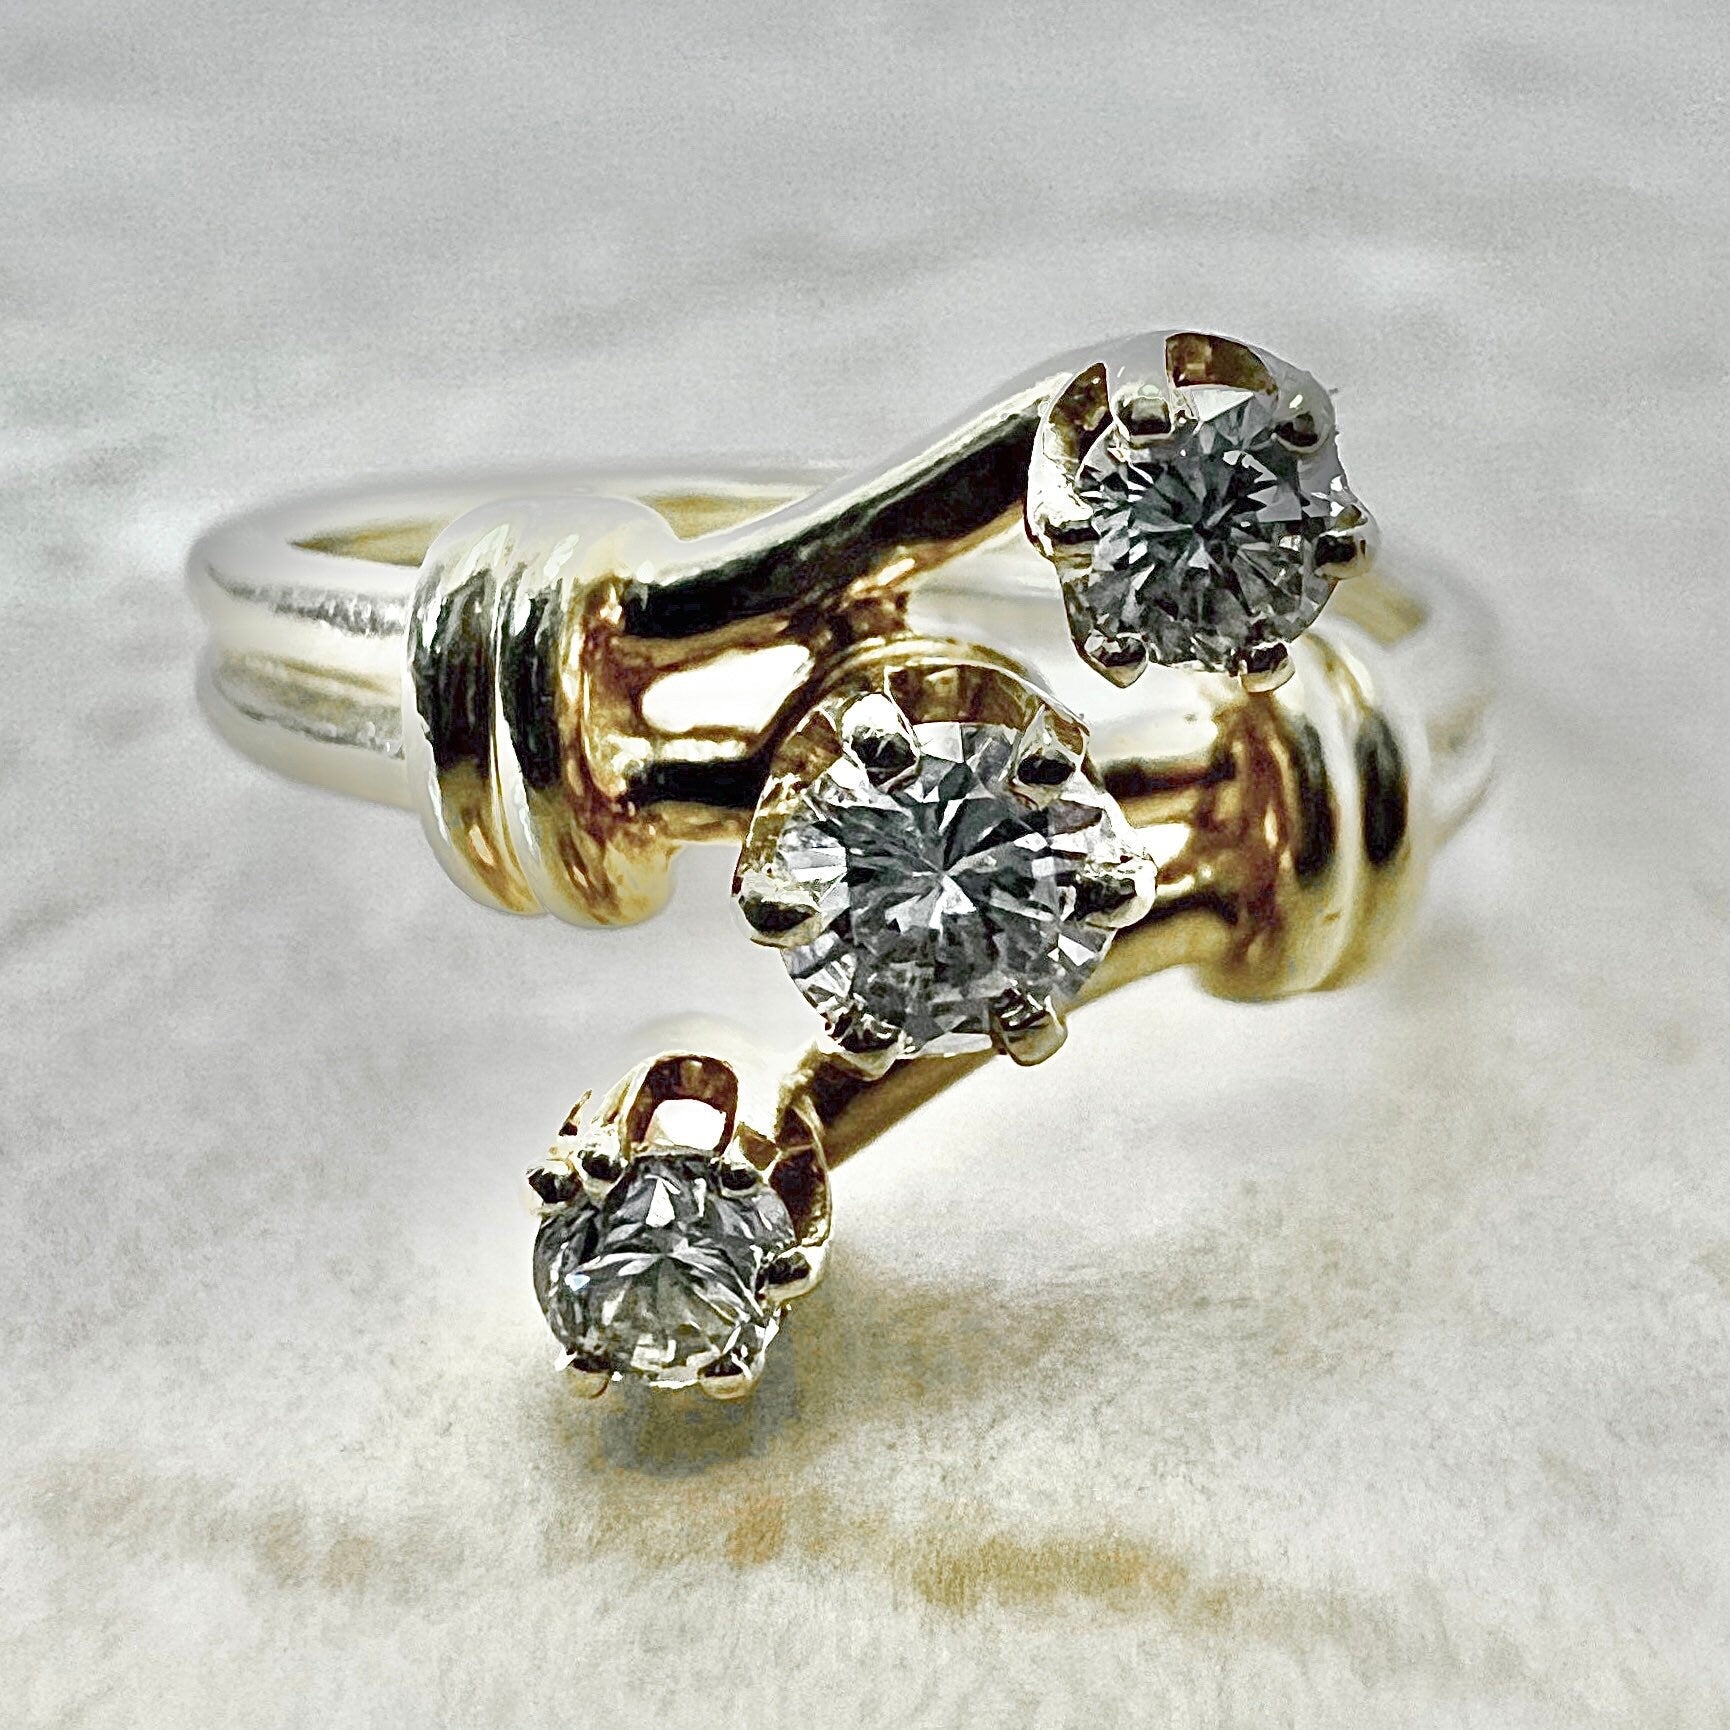 Vintage 14K 3 Stone Diamond Ring - Yellow Gold Diamond Cocktail Ring - Anniversary Ring - Promise Ring - Statement Ring - Best Gift For Her